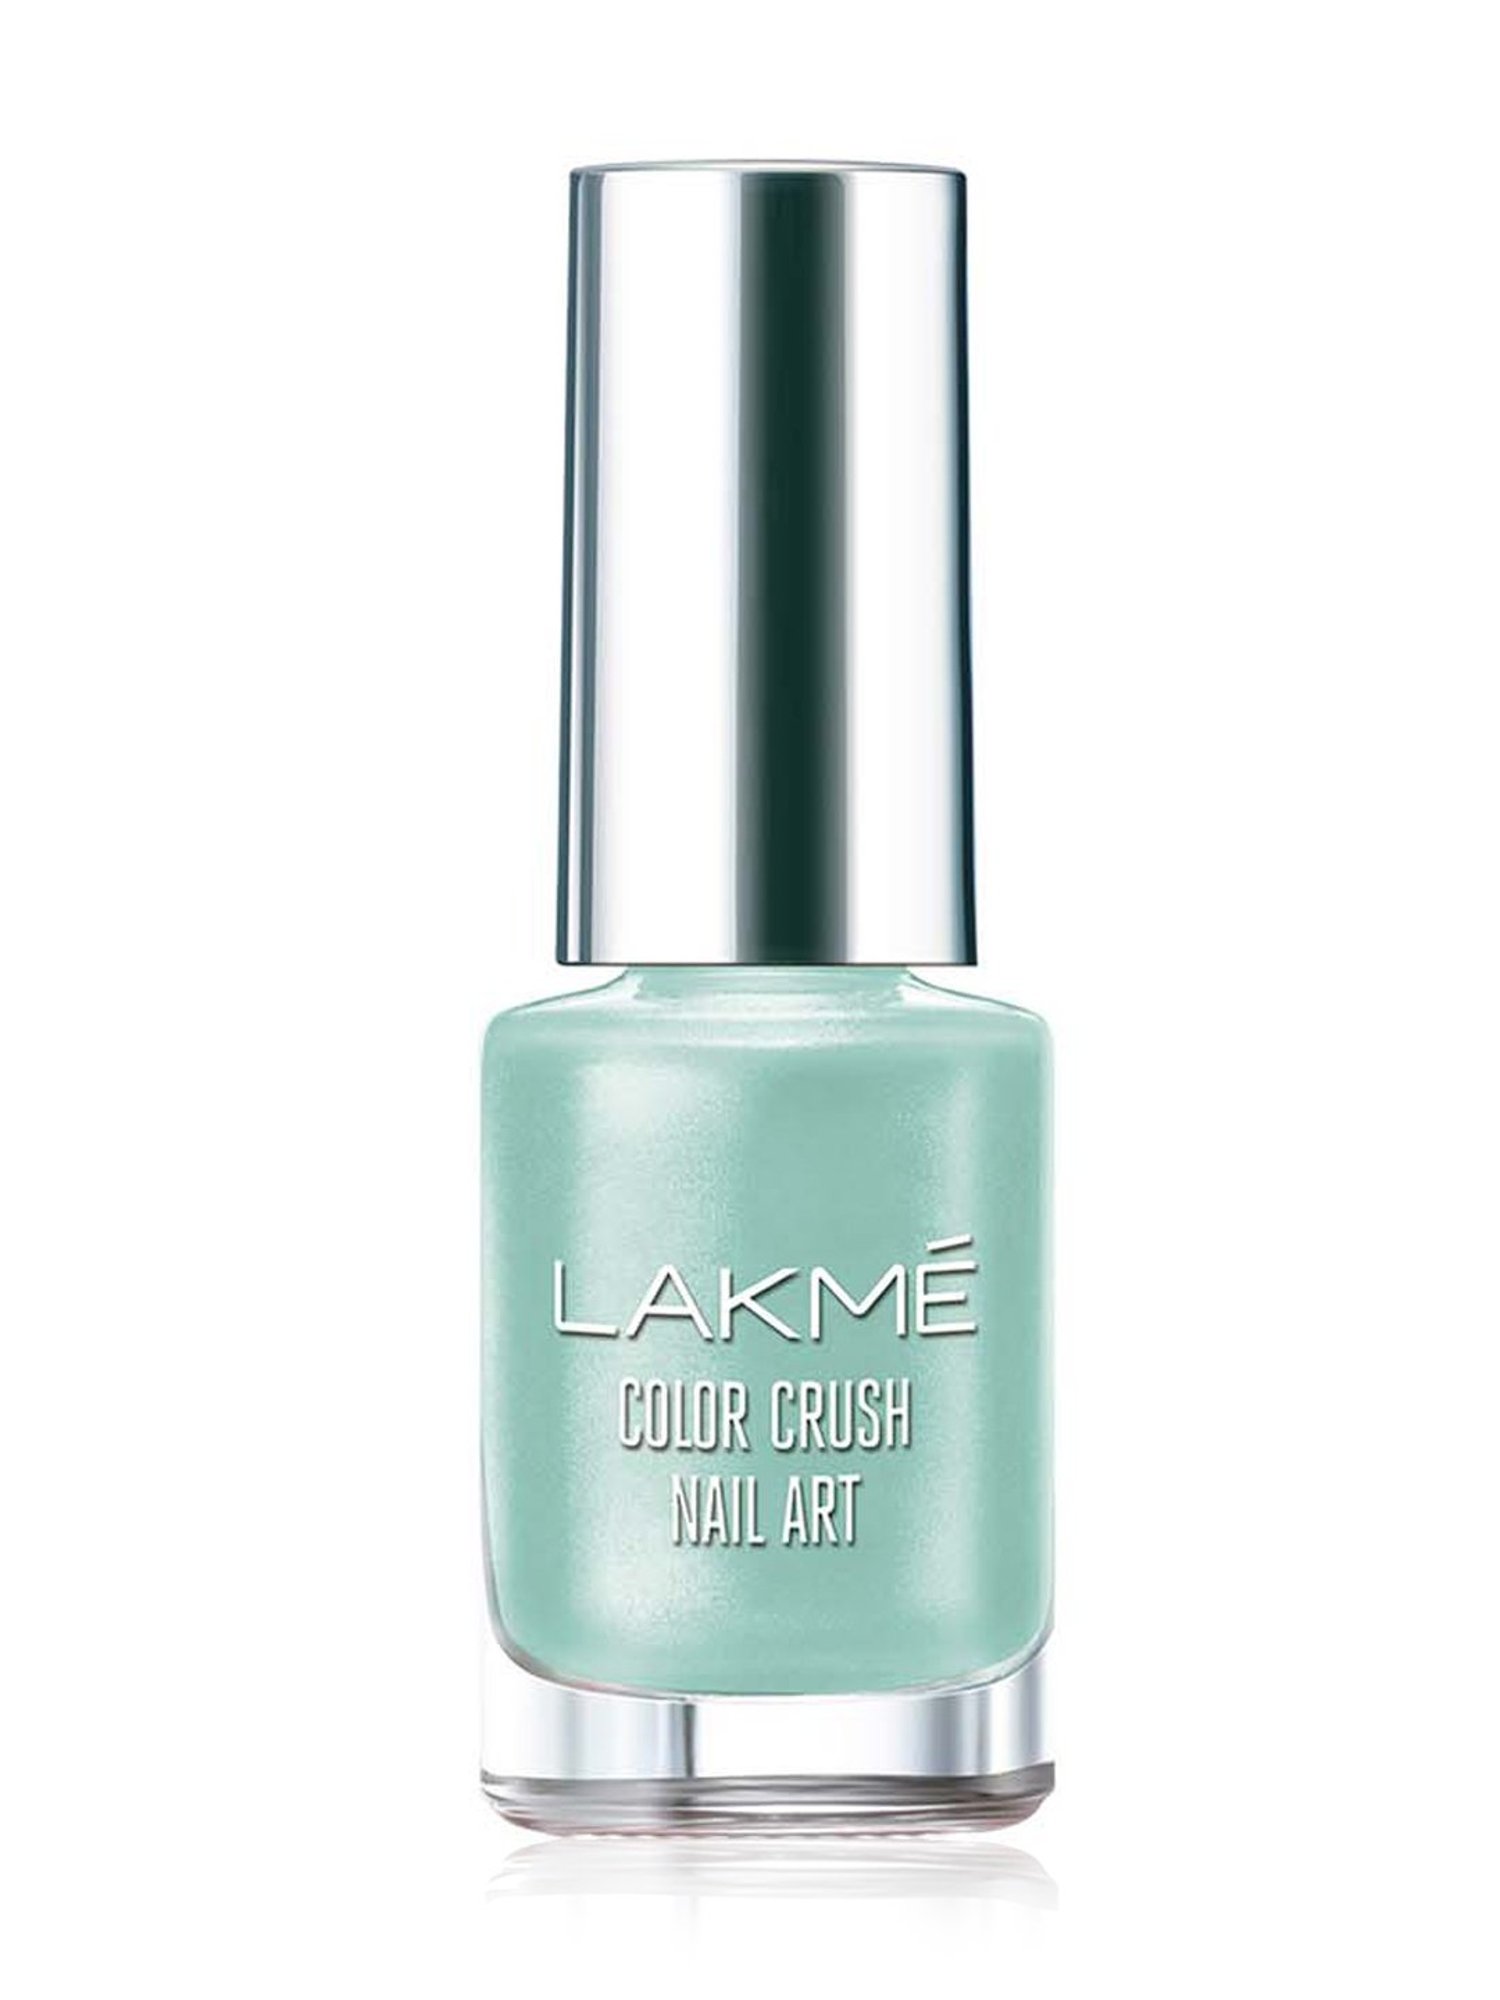 Buy Lakme Color Crush Nail Art Online at Best Price of Rs 150.4 - bigbasket